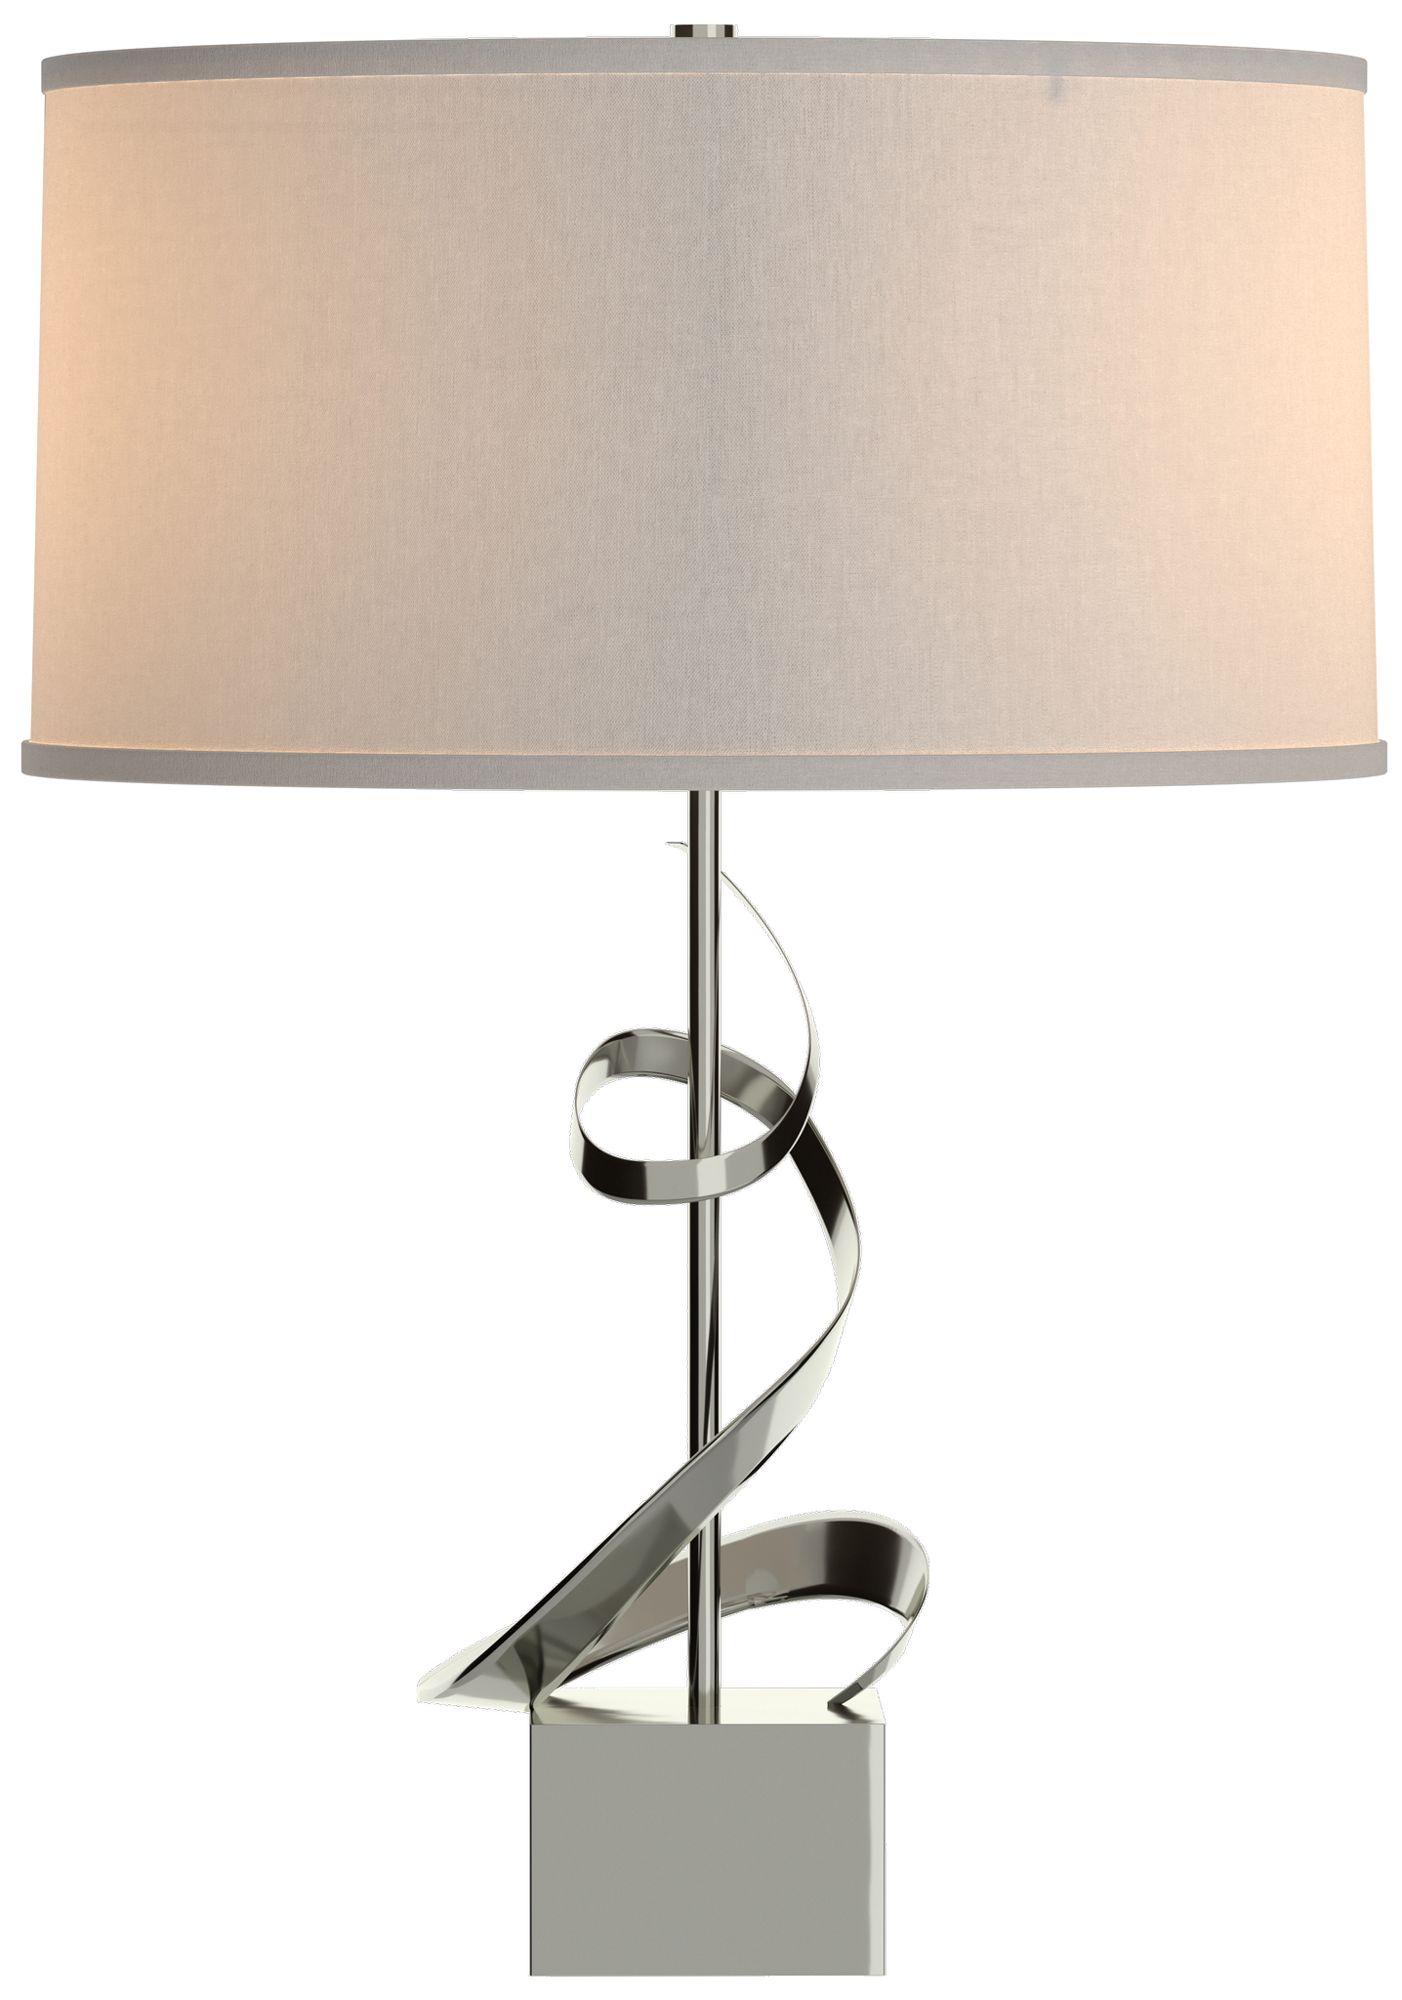 Gallery Spiral 22.9" High Sterling Table Lamp With Light Grey Shade